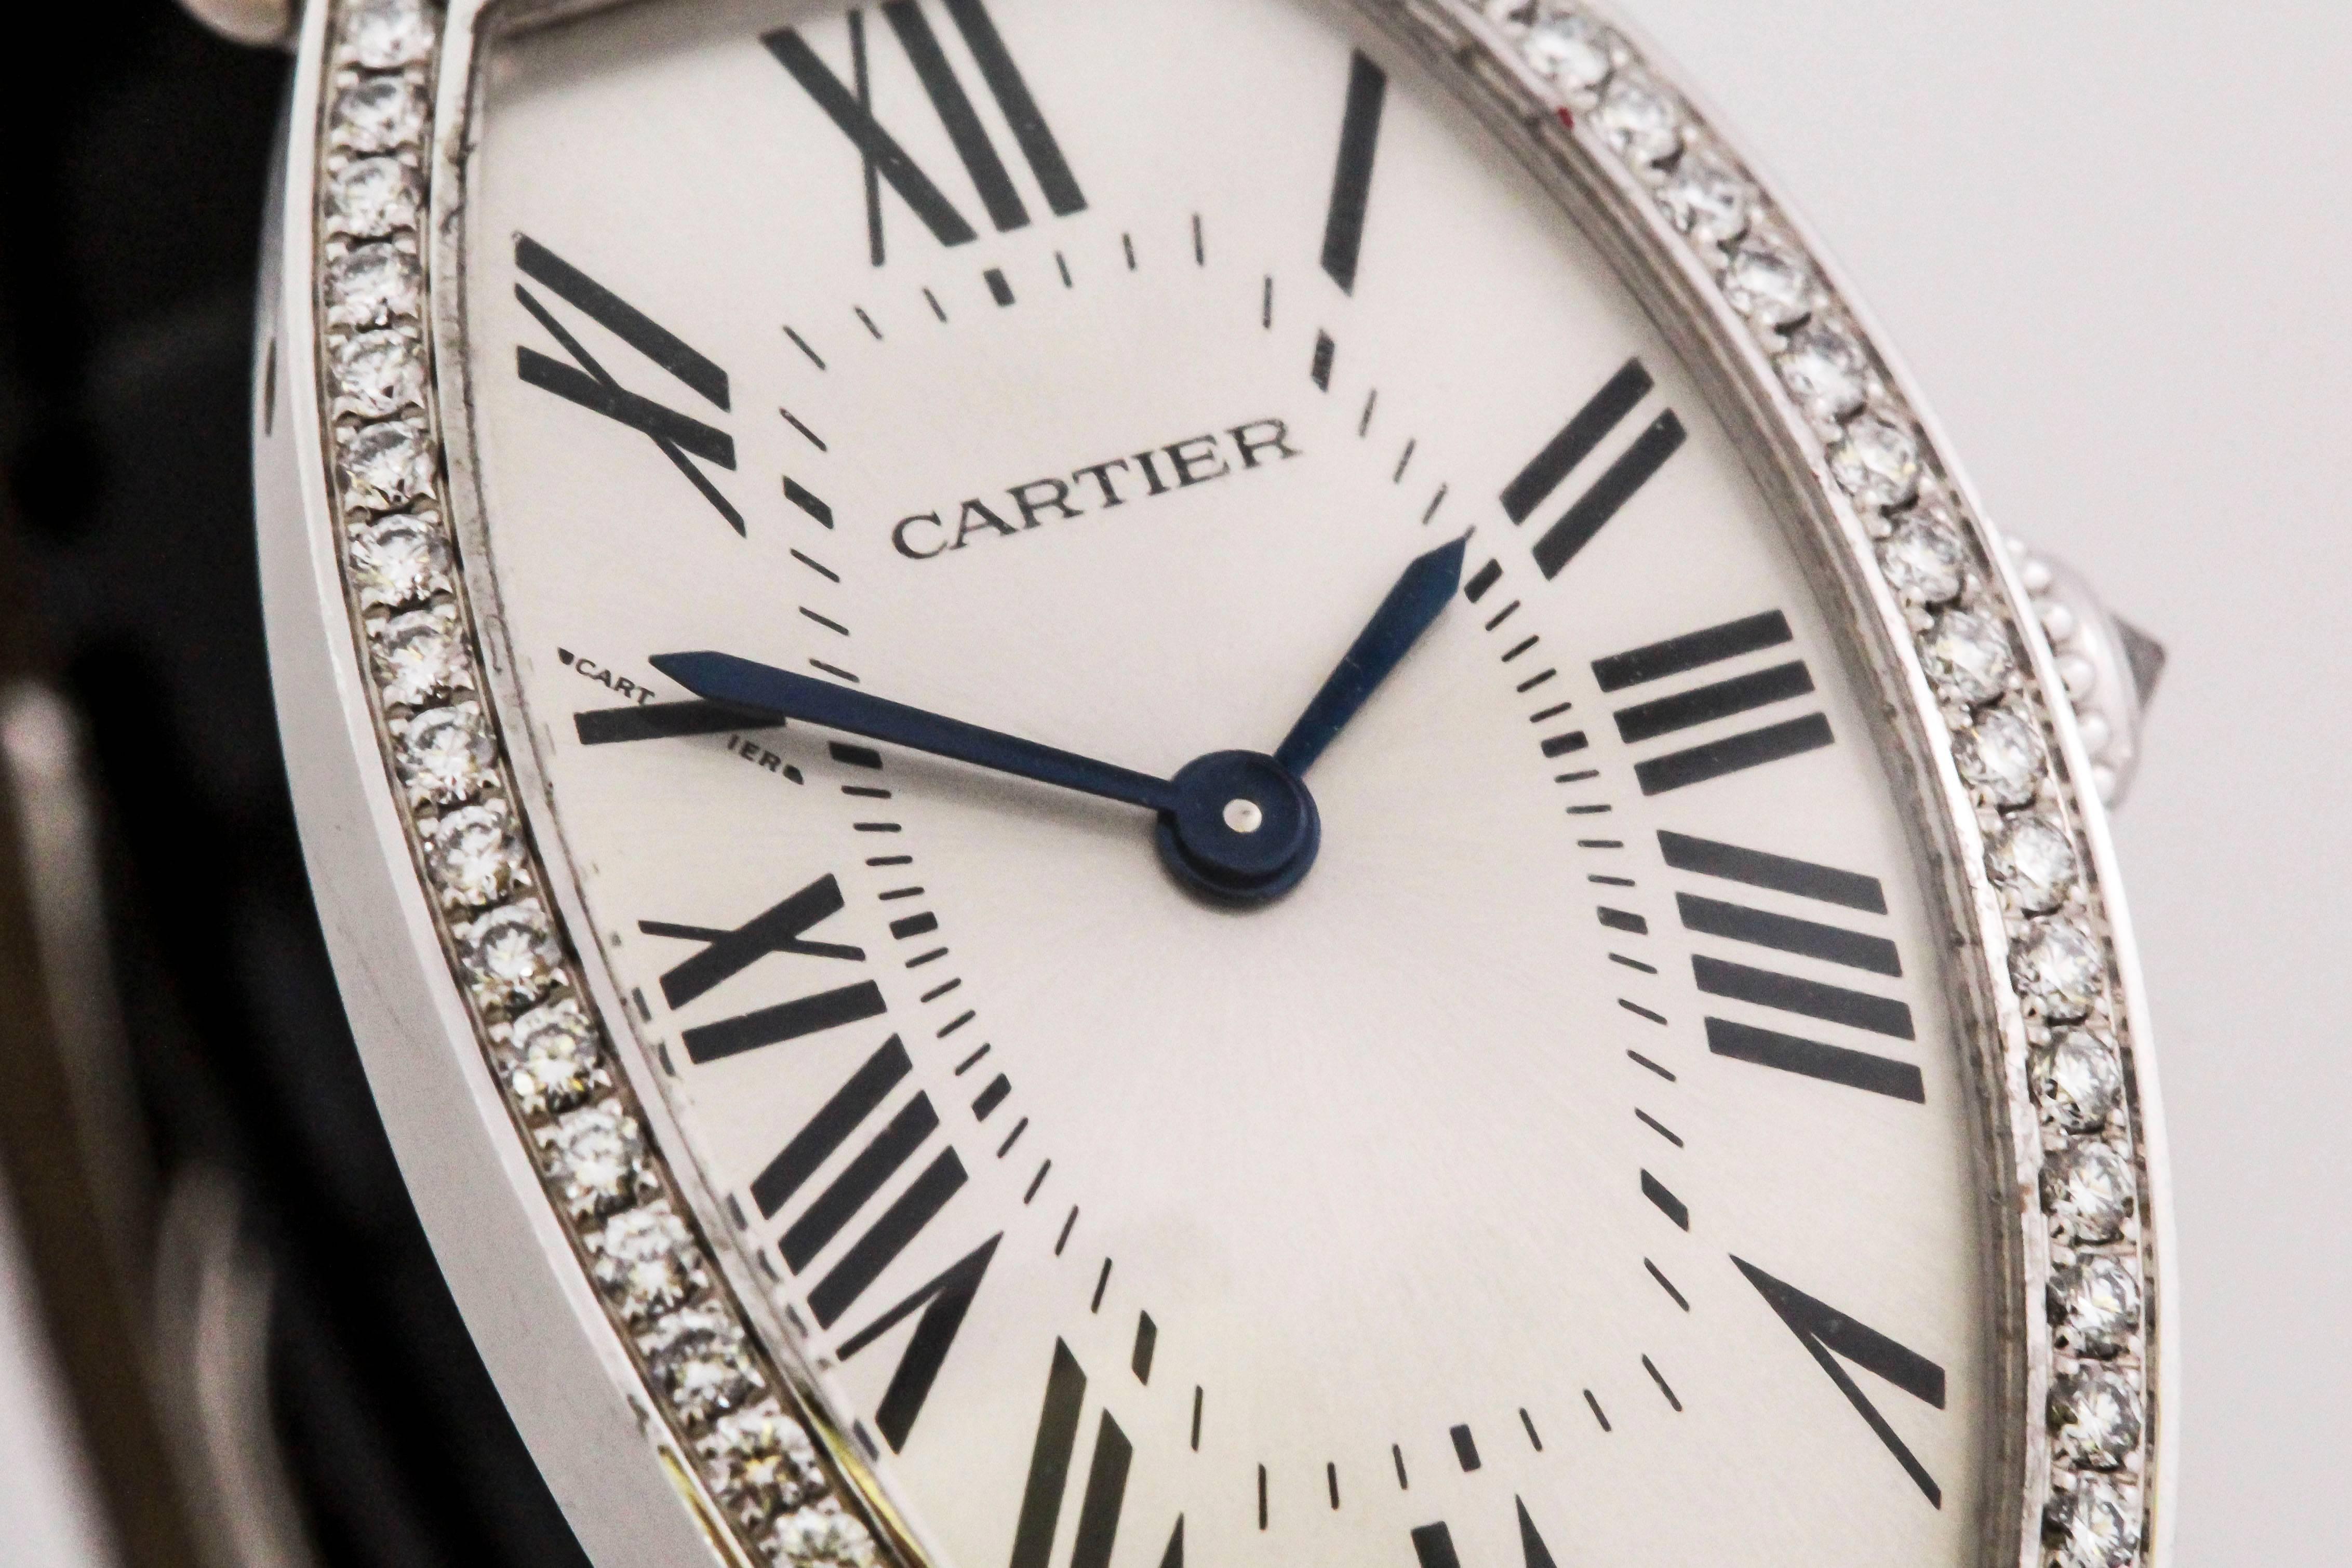 Women's Cartier 18 Karat White Gold and Diamond Manual Wind Watch with Guilloche Dial